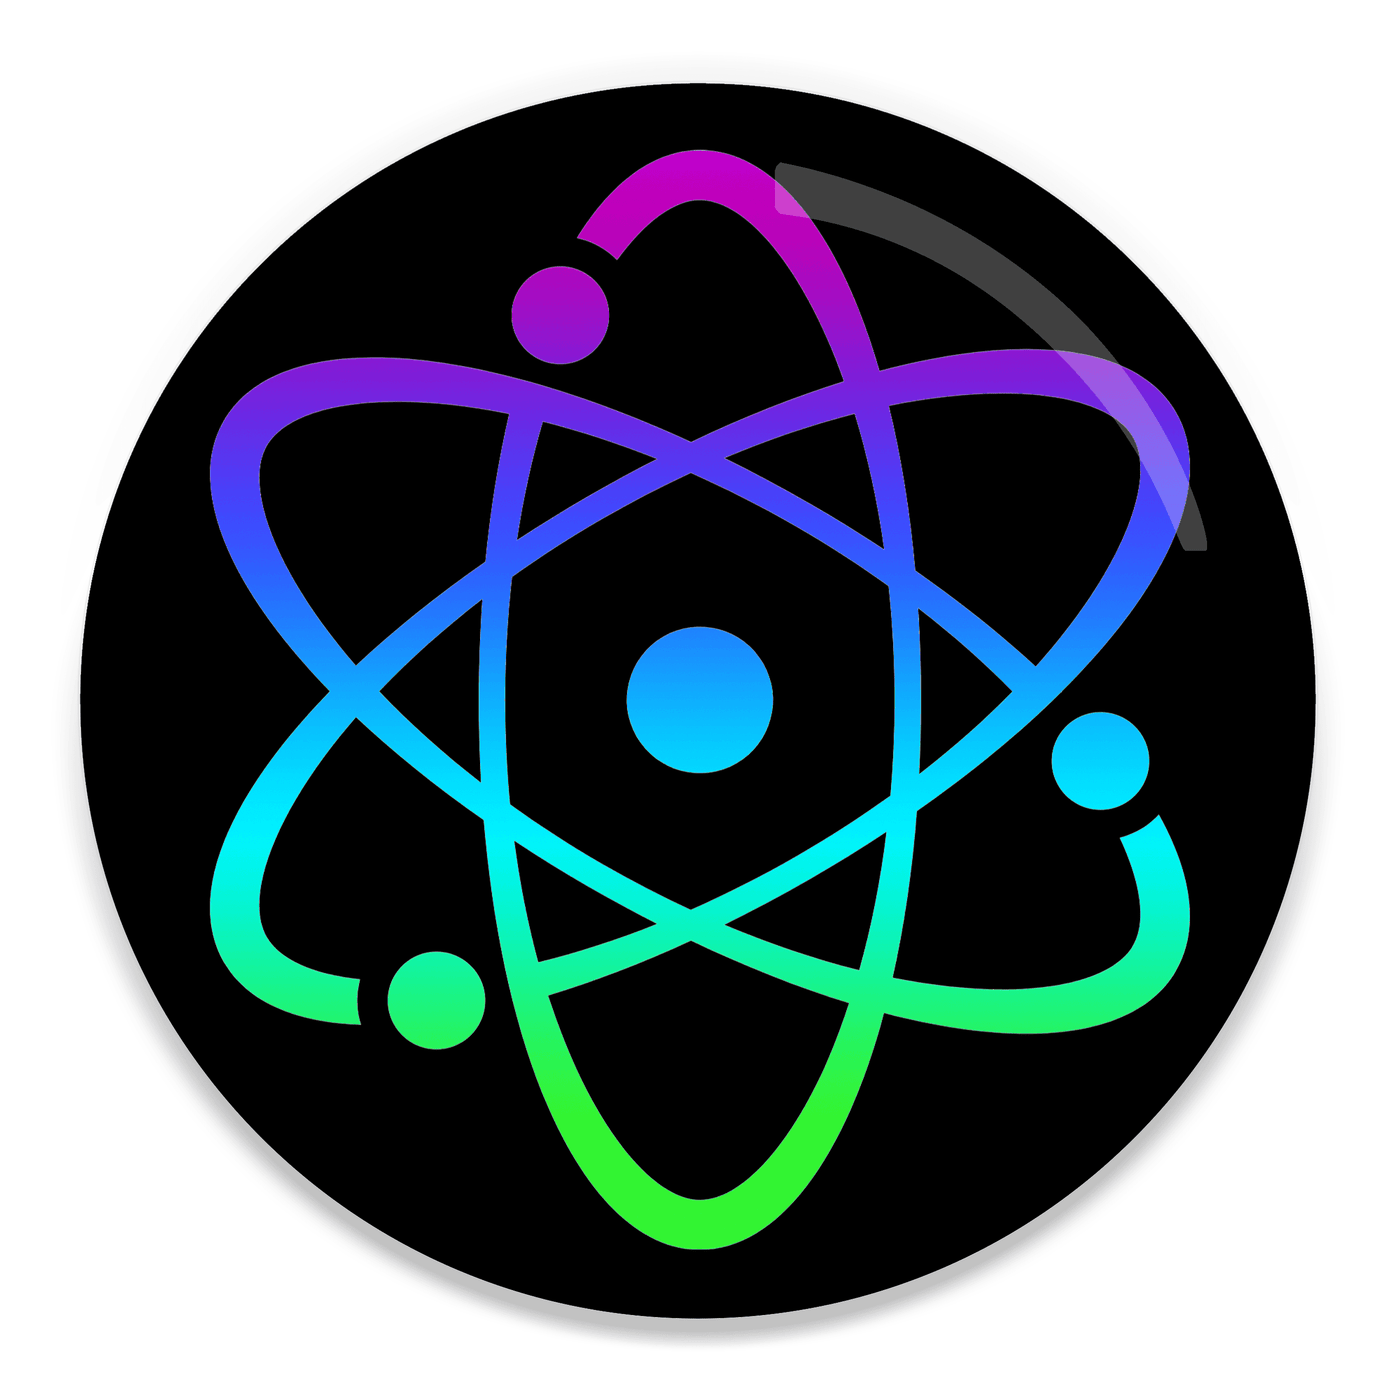 2.25 inch round colorful magnet with image of an atom in green blue and purple